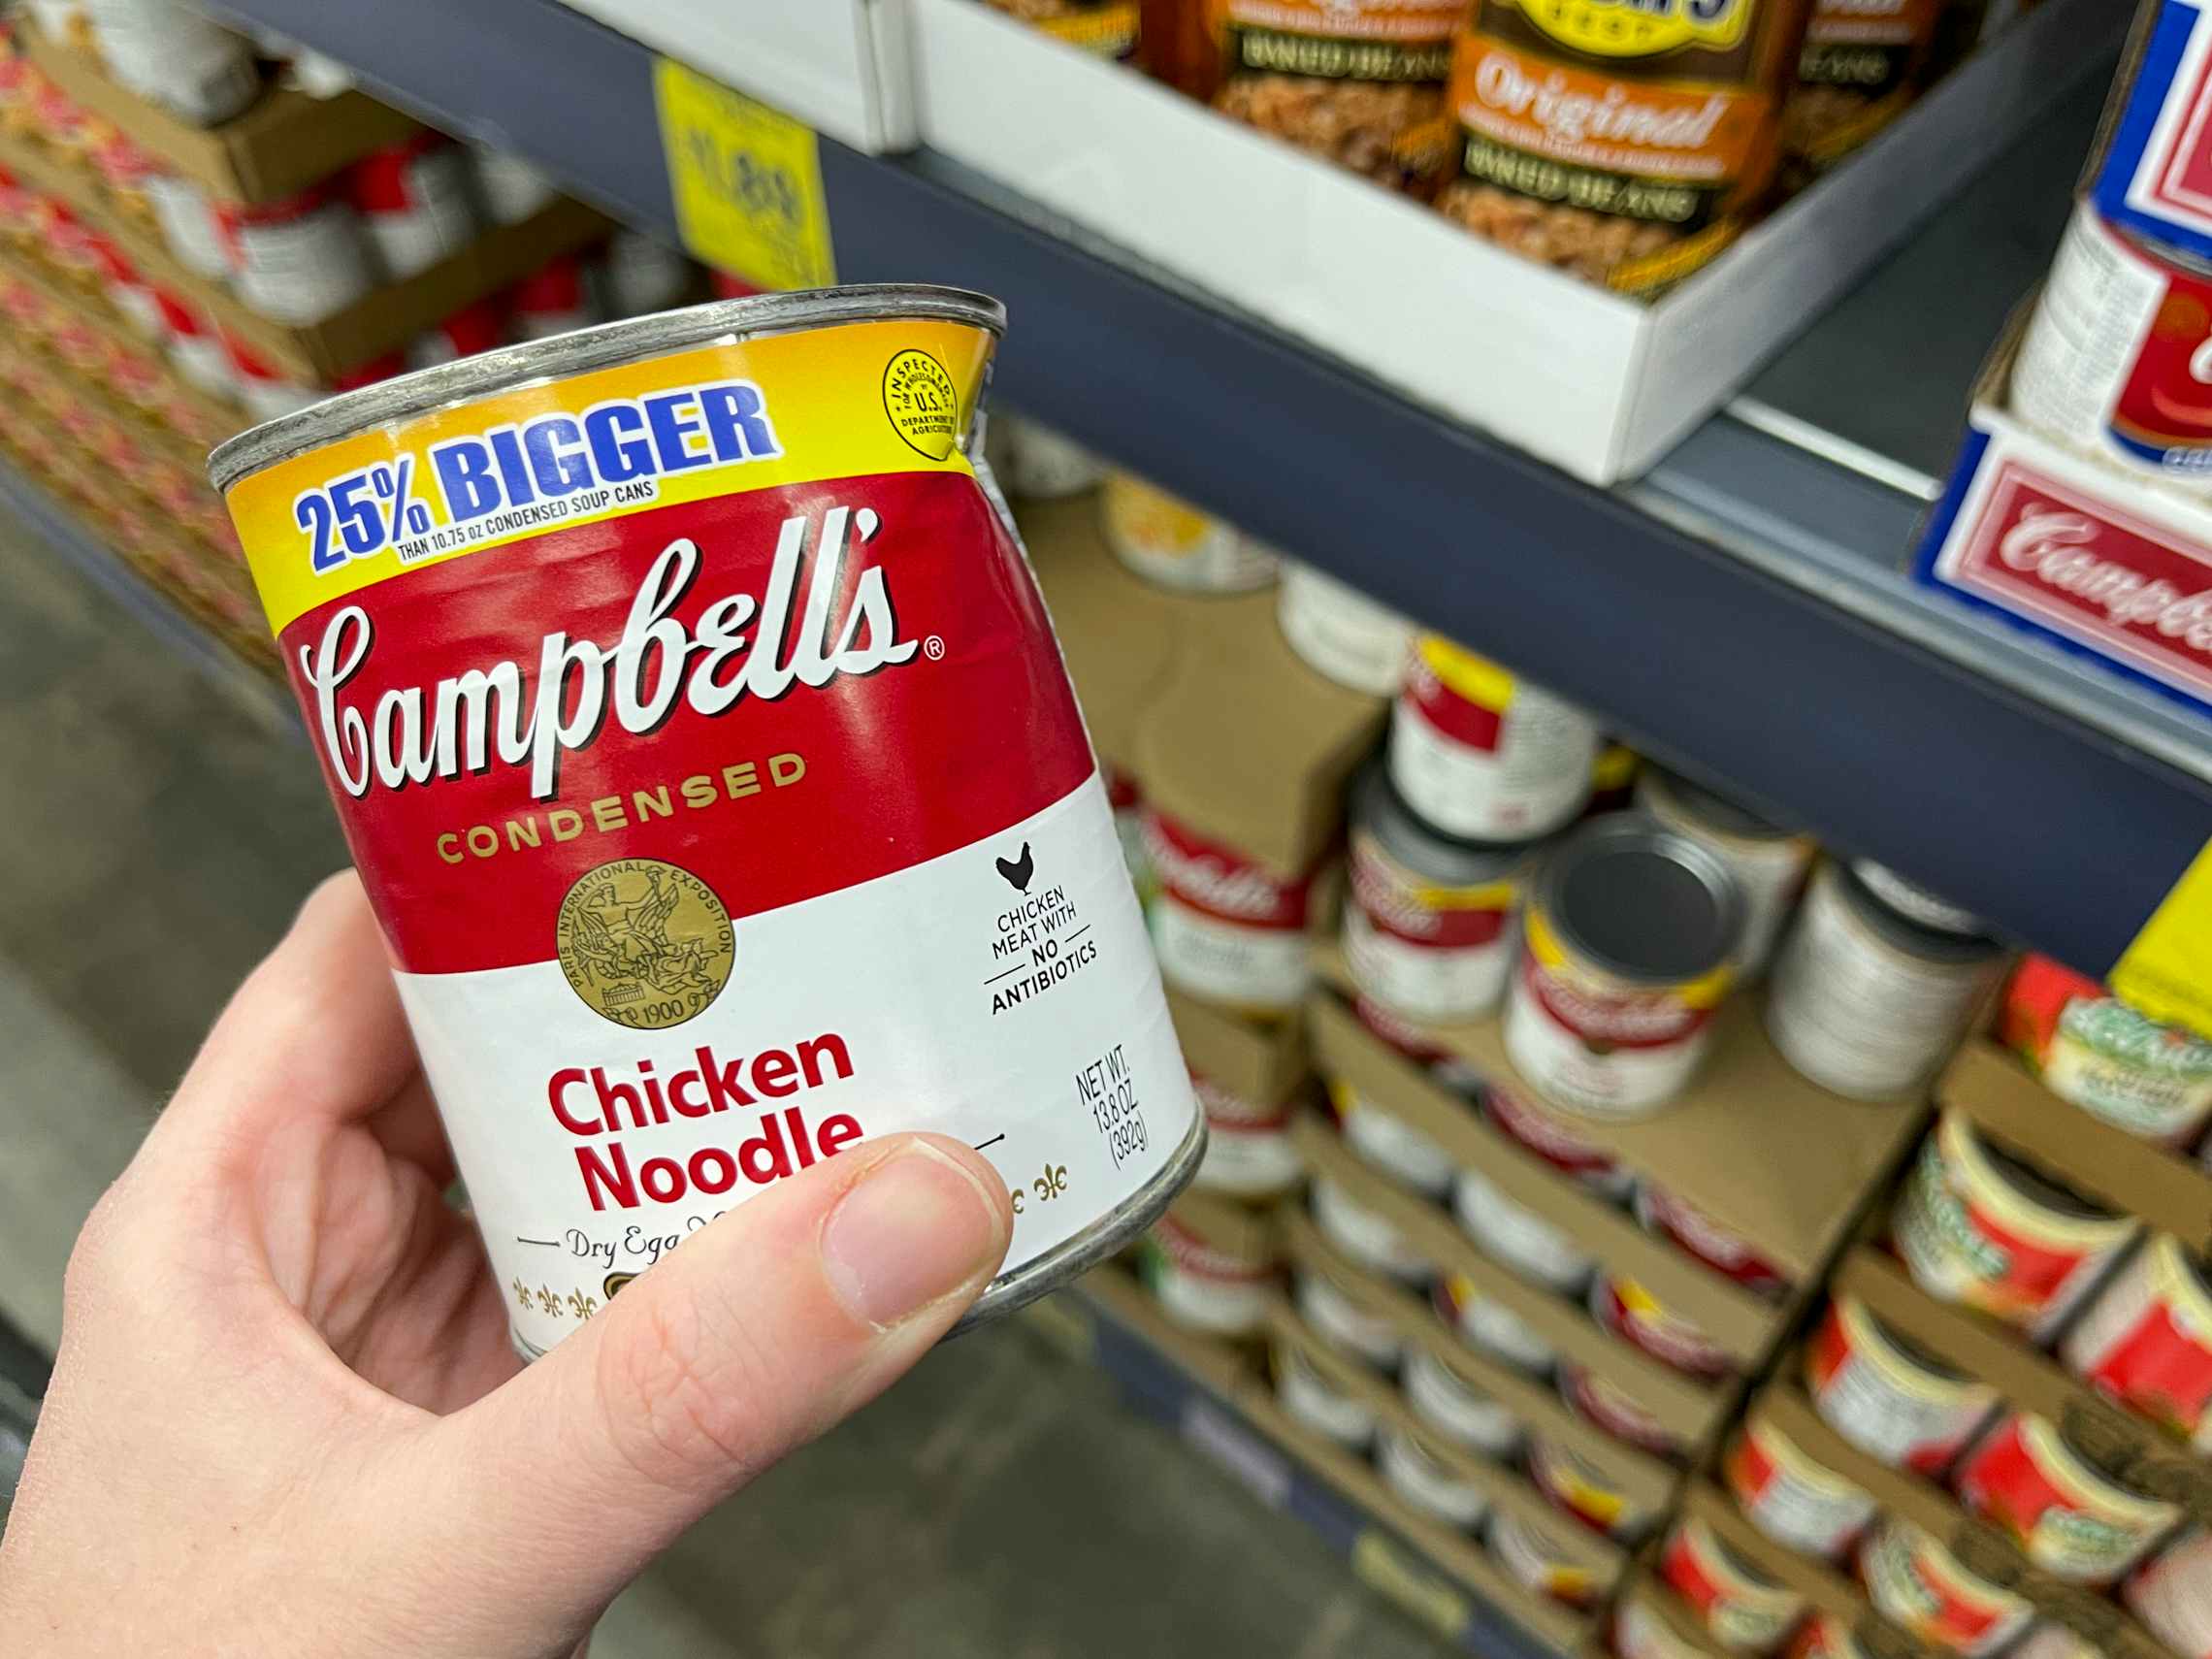 A dented can of Chicken noodle soup.